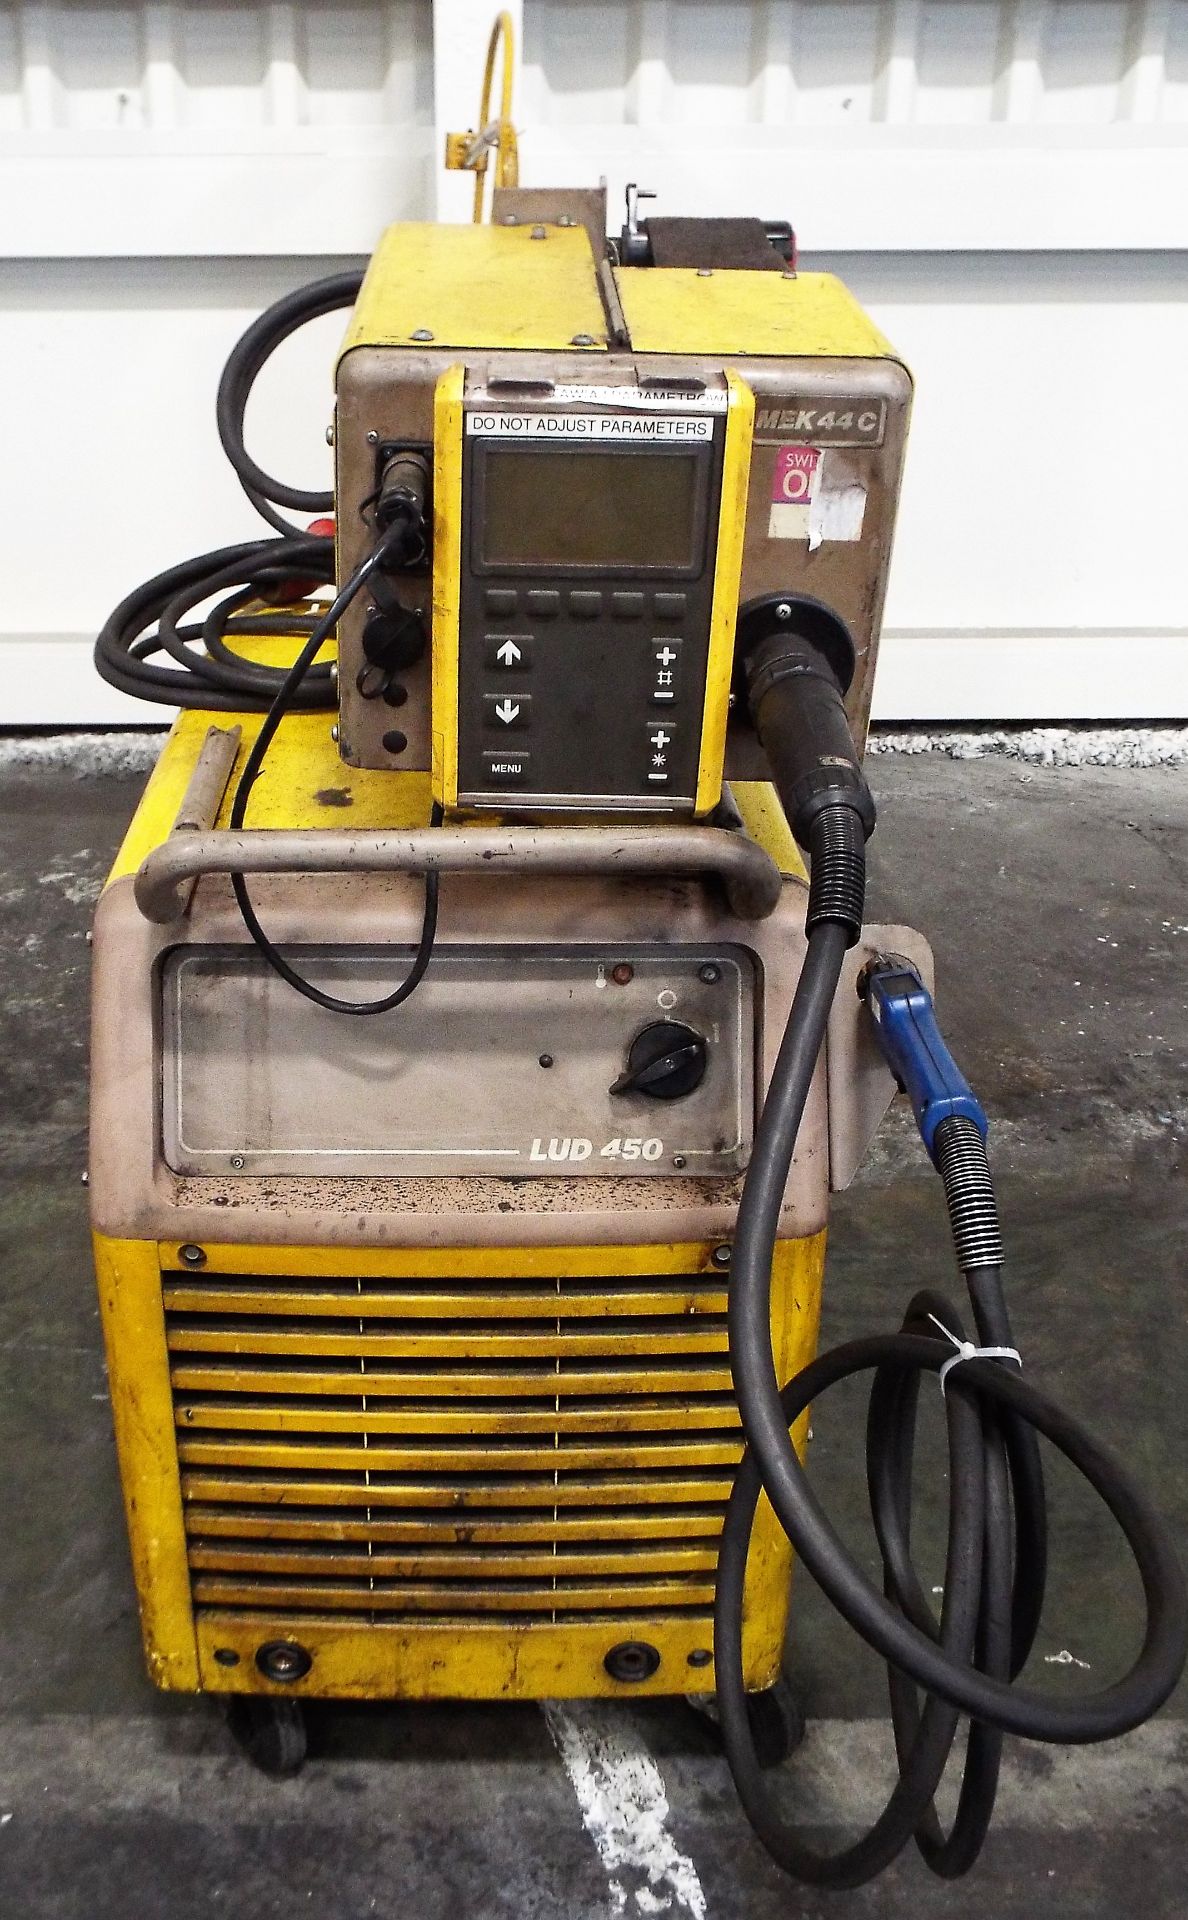 Esab Aristo Portable Welding Set complete with MEK 44C Wire Feed & PUA-1 Pendant. - Image 3 of 7